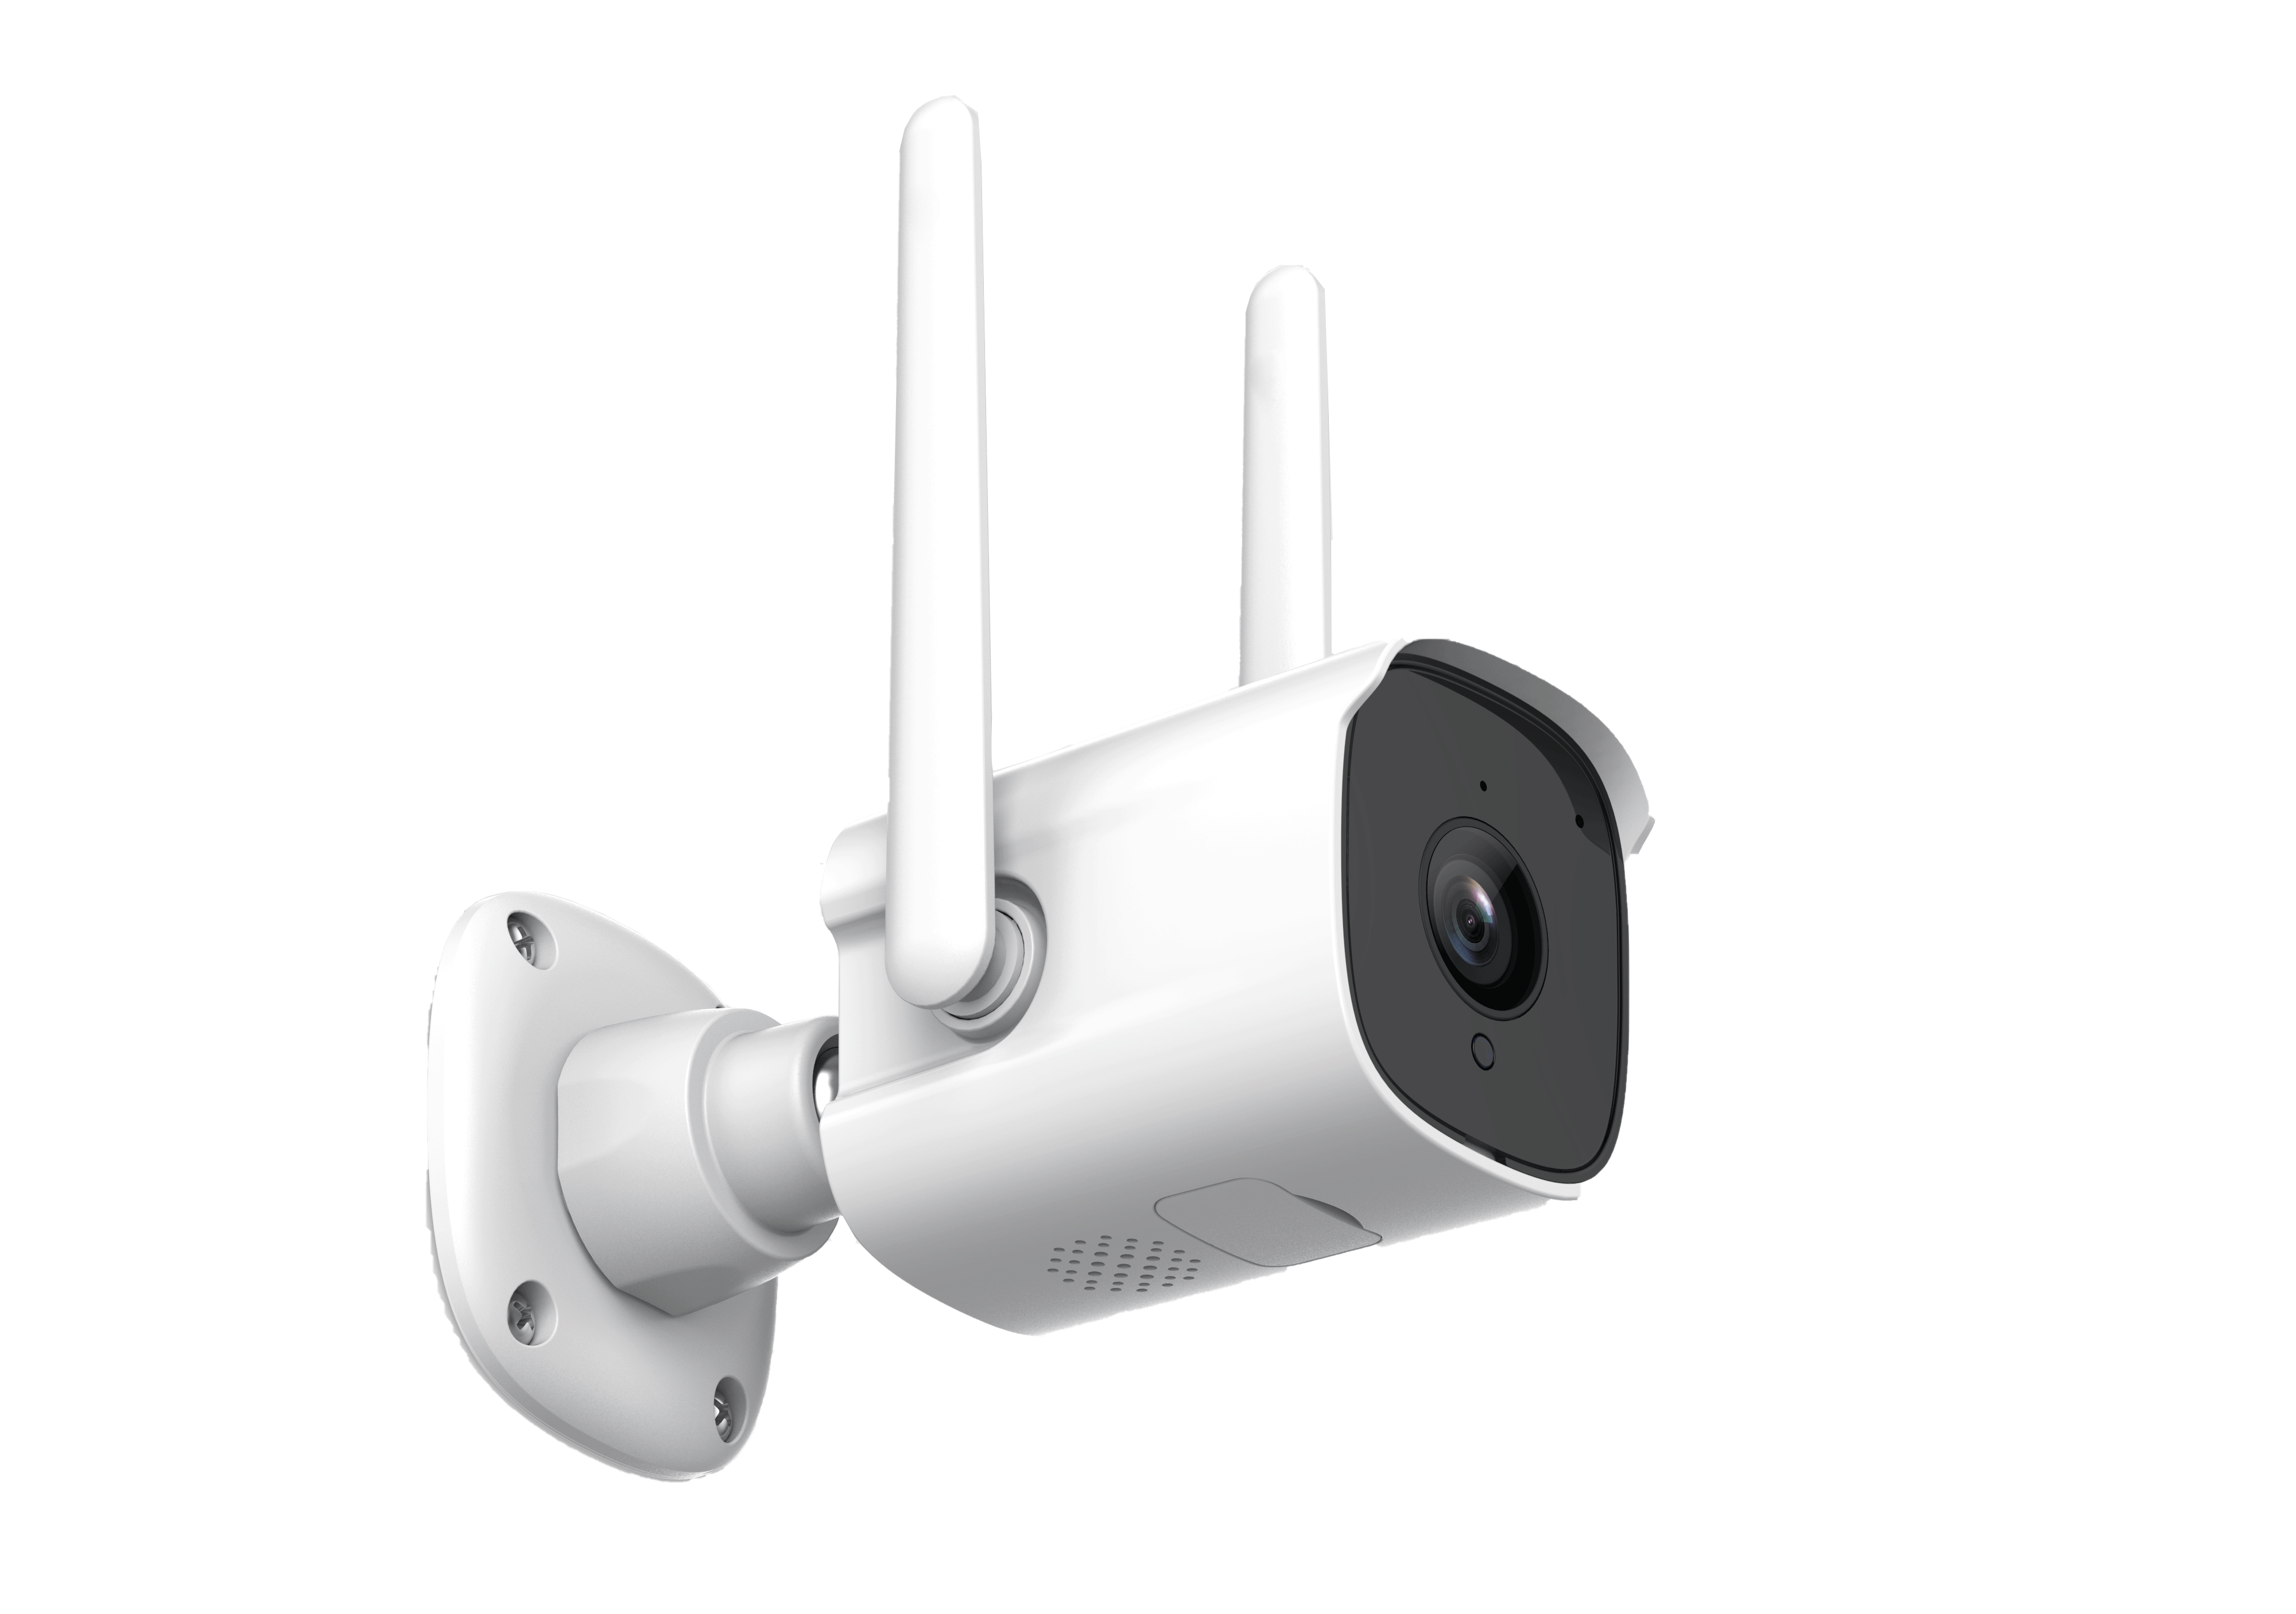 Can the wireless webcam playback?